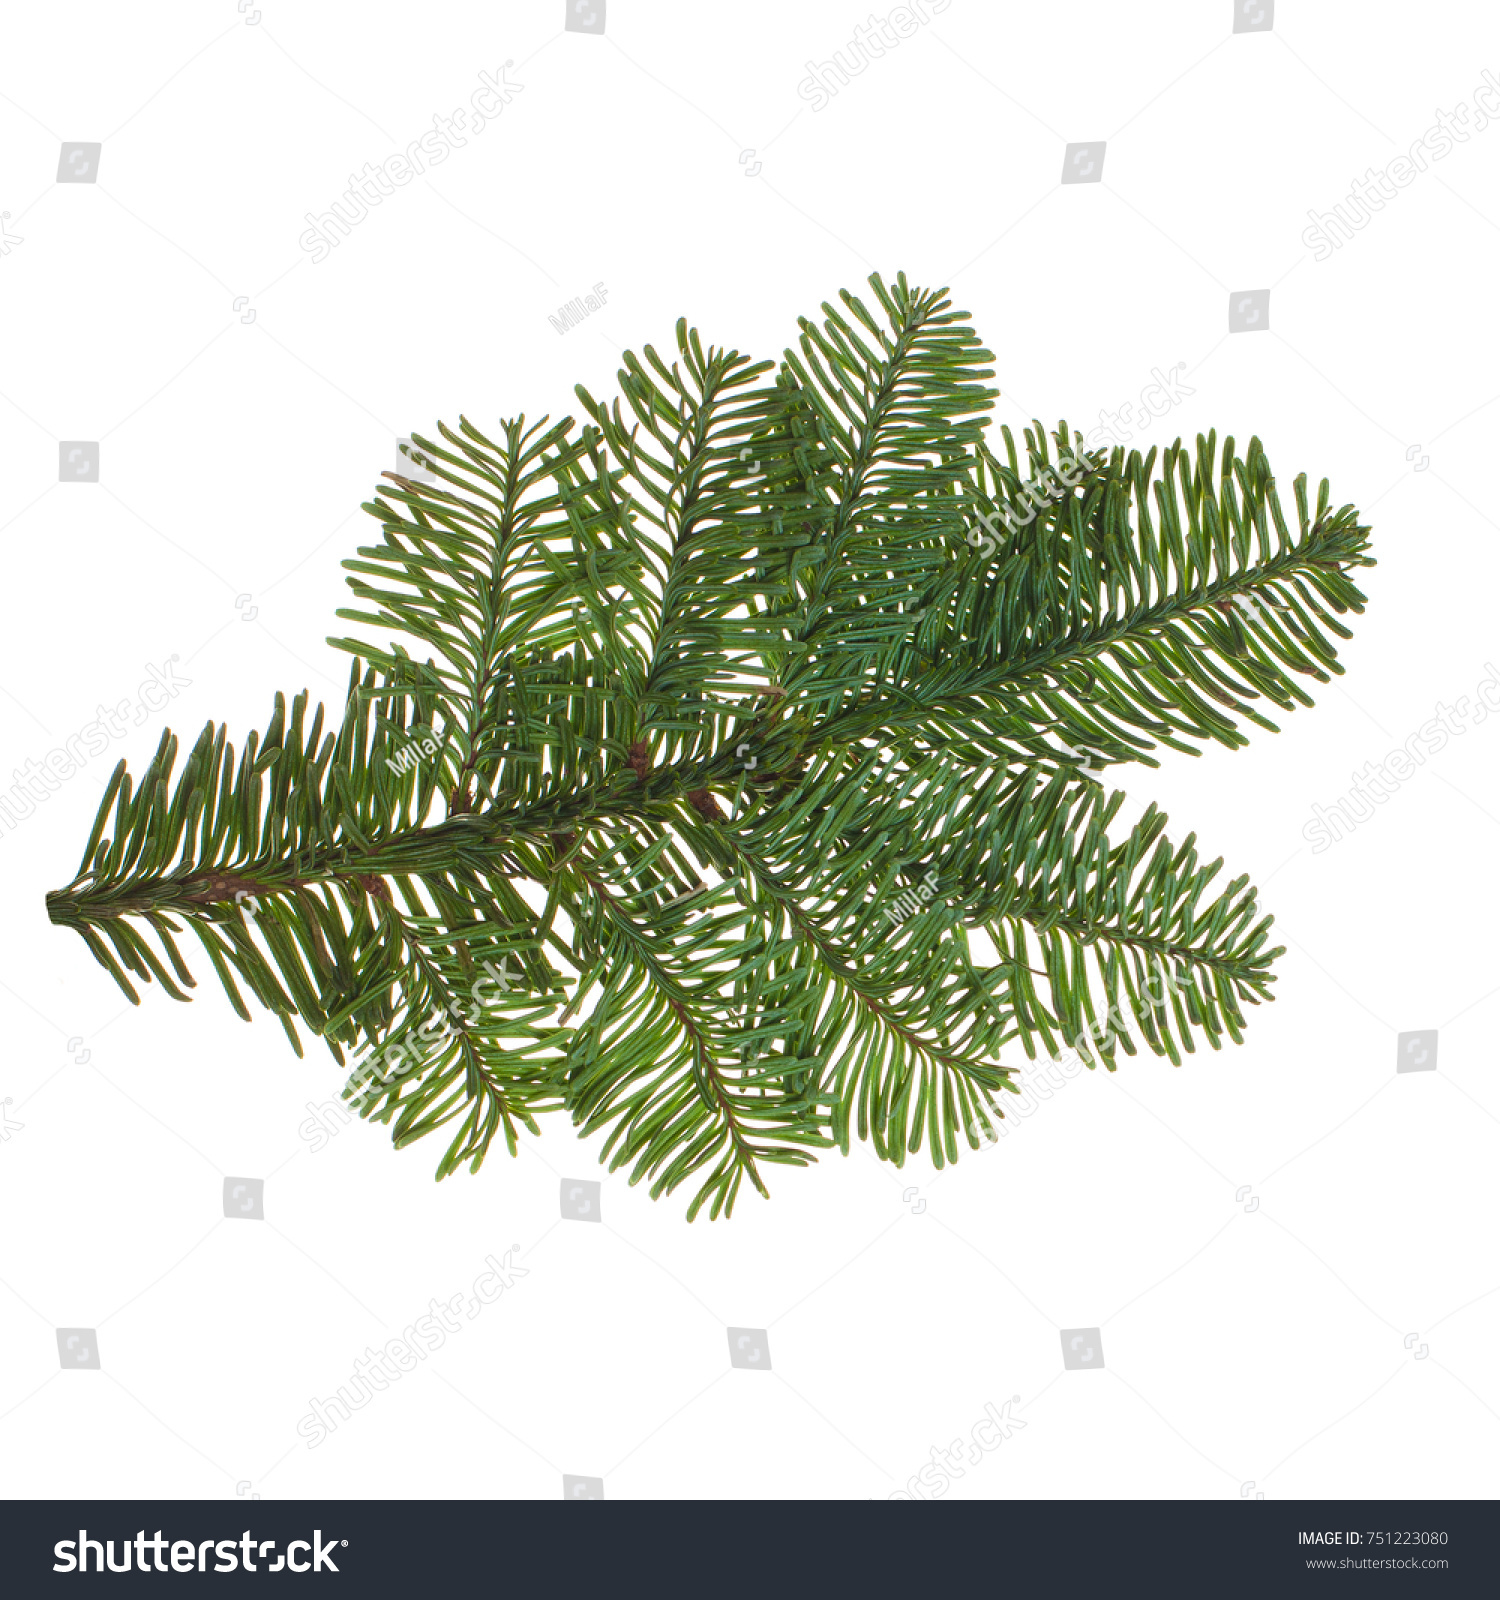 Evergreen Christmas Tree Twig Isolated on White Background. Green Fir on White #751223080